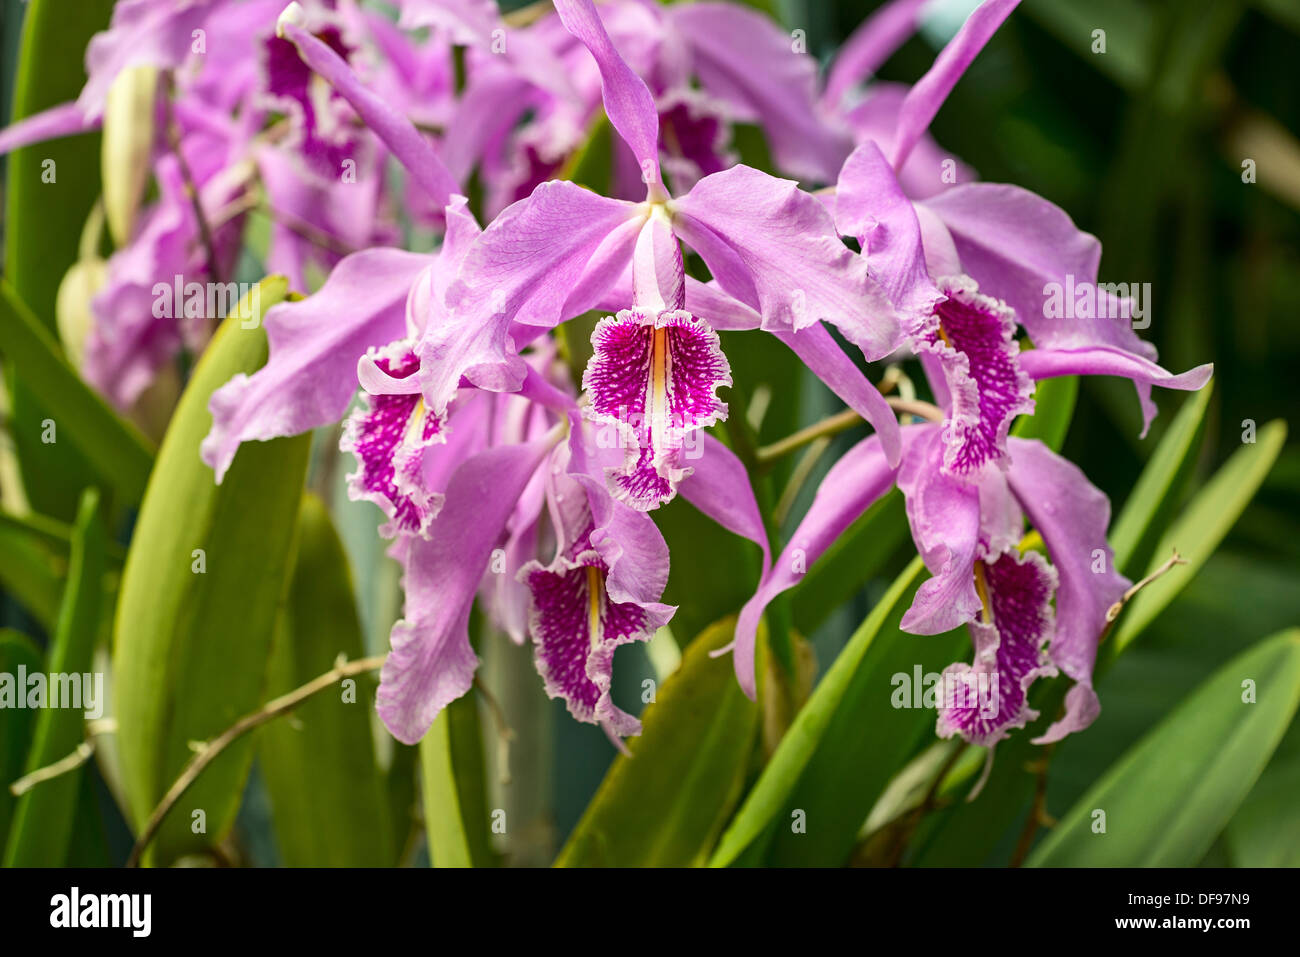 Exotic and colorful orchids. Stock Photo